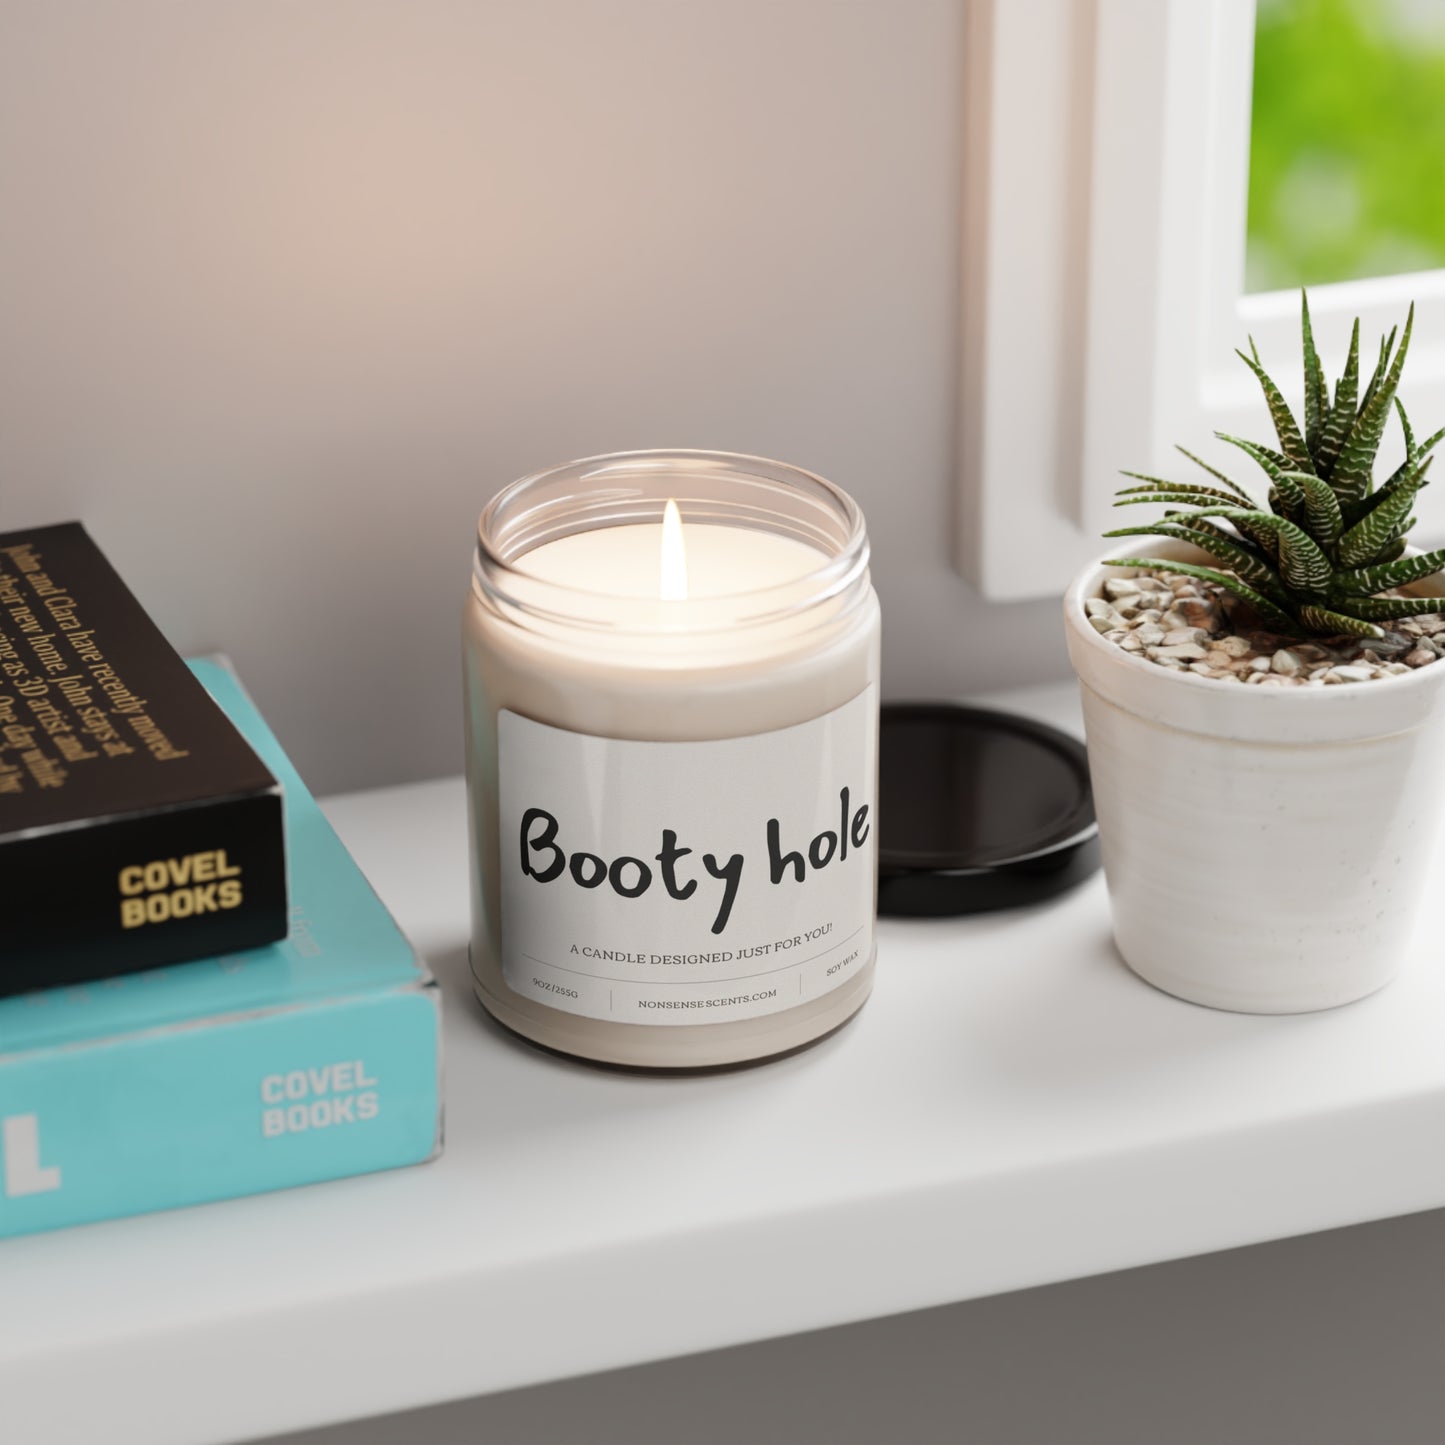 "Booty Hole" Scented Candle